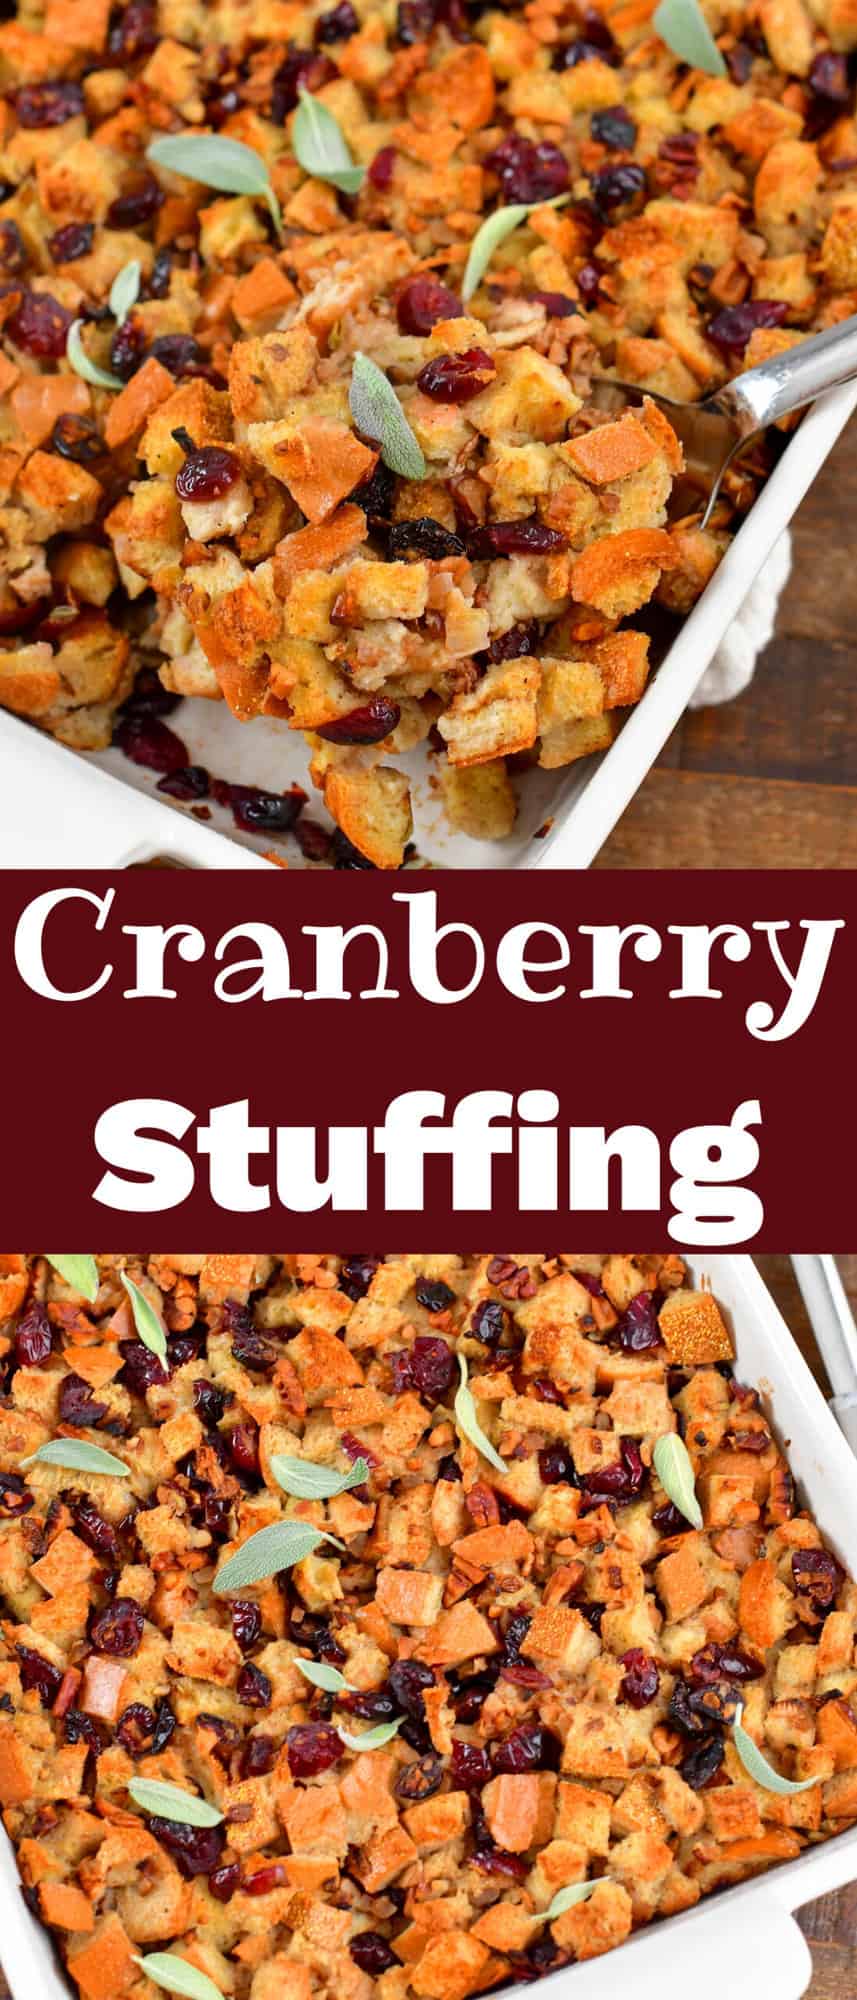 collage of two close images of cranberry stuffing and title.